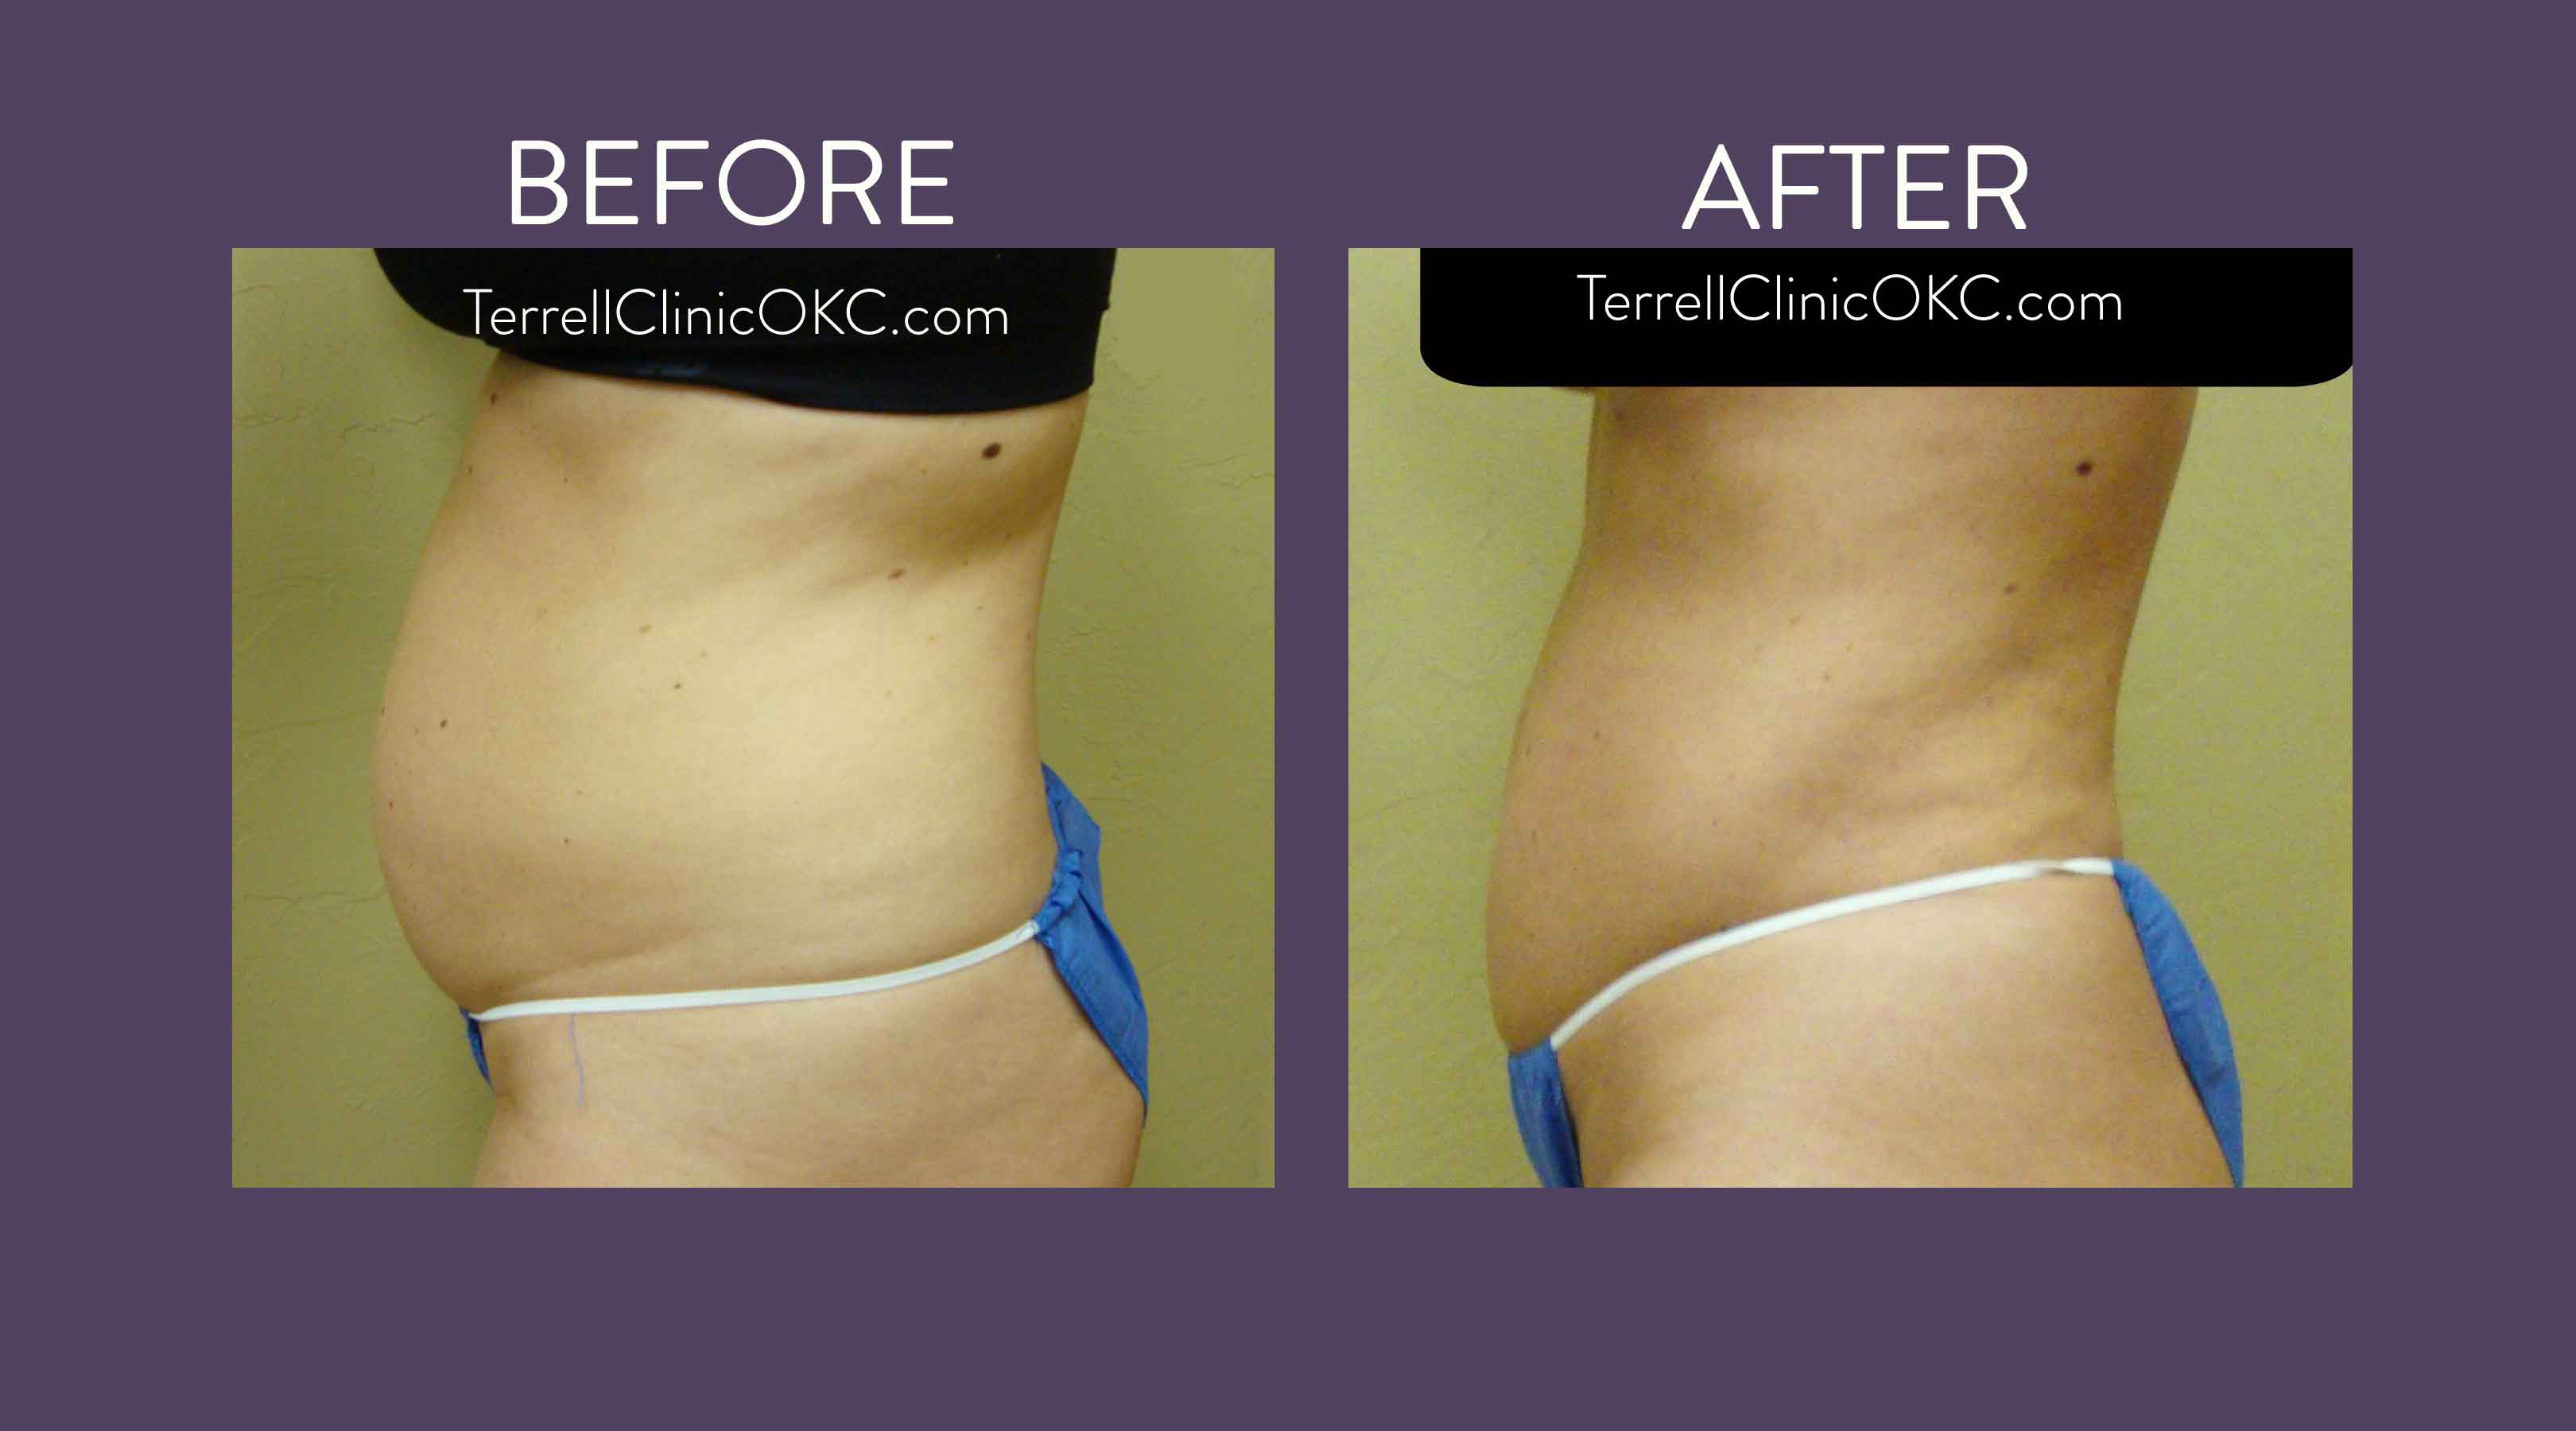 CoolSculpting for Back Fat - Dr. Michele Green M.D.